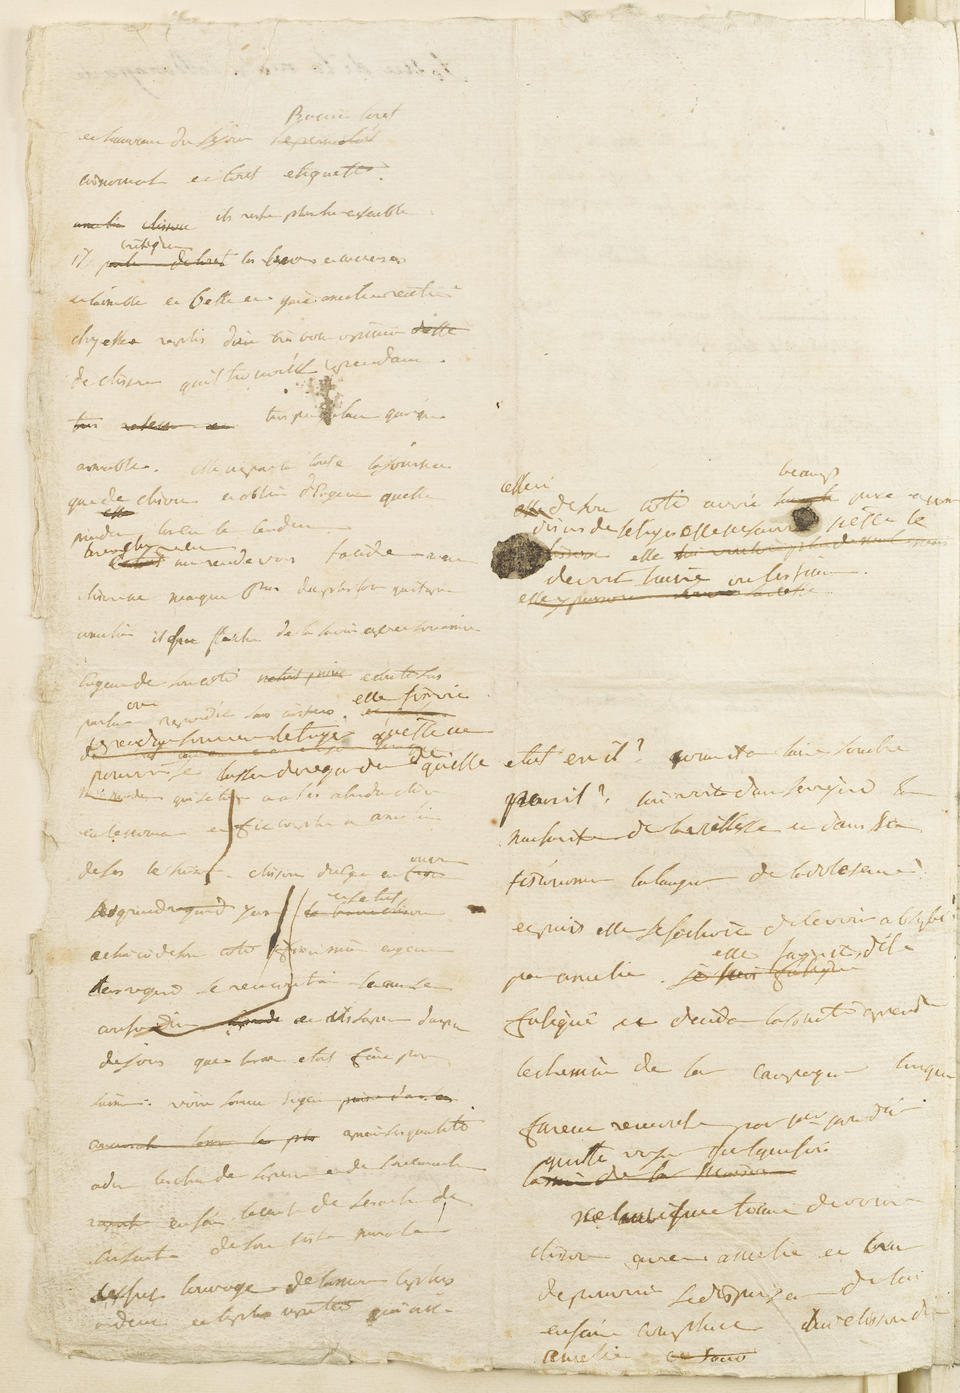 A FRAGMENT OF NAPOLEON'S FICTION NAPOLEON BONAPARTE. Autograph working manuscript, an extract from the romantic novella Clisson et Eugenie, his autobiographical work of fiction, in French, beginning "...The freshness and the eyes of Amelie merited the attentions of Clisson...", n.p., [c.1795]